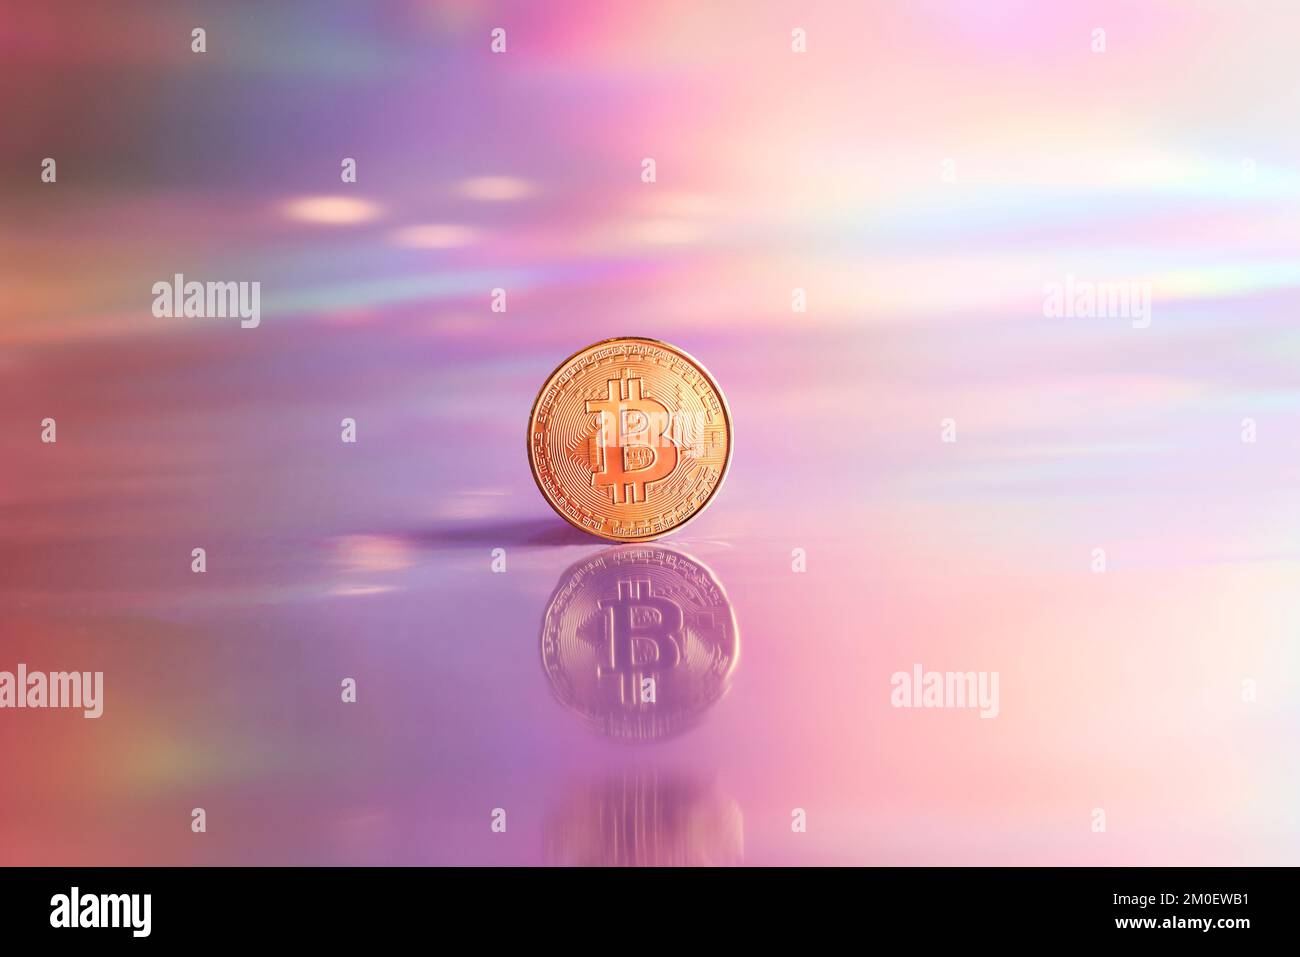 Golden bitcoin coin on holographic, abstract, neon background. digital currency, business style. Mining and trade bitcoin concept. Stock Photo